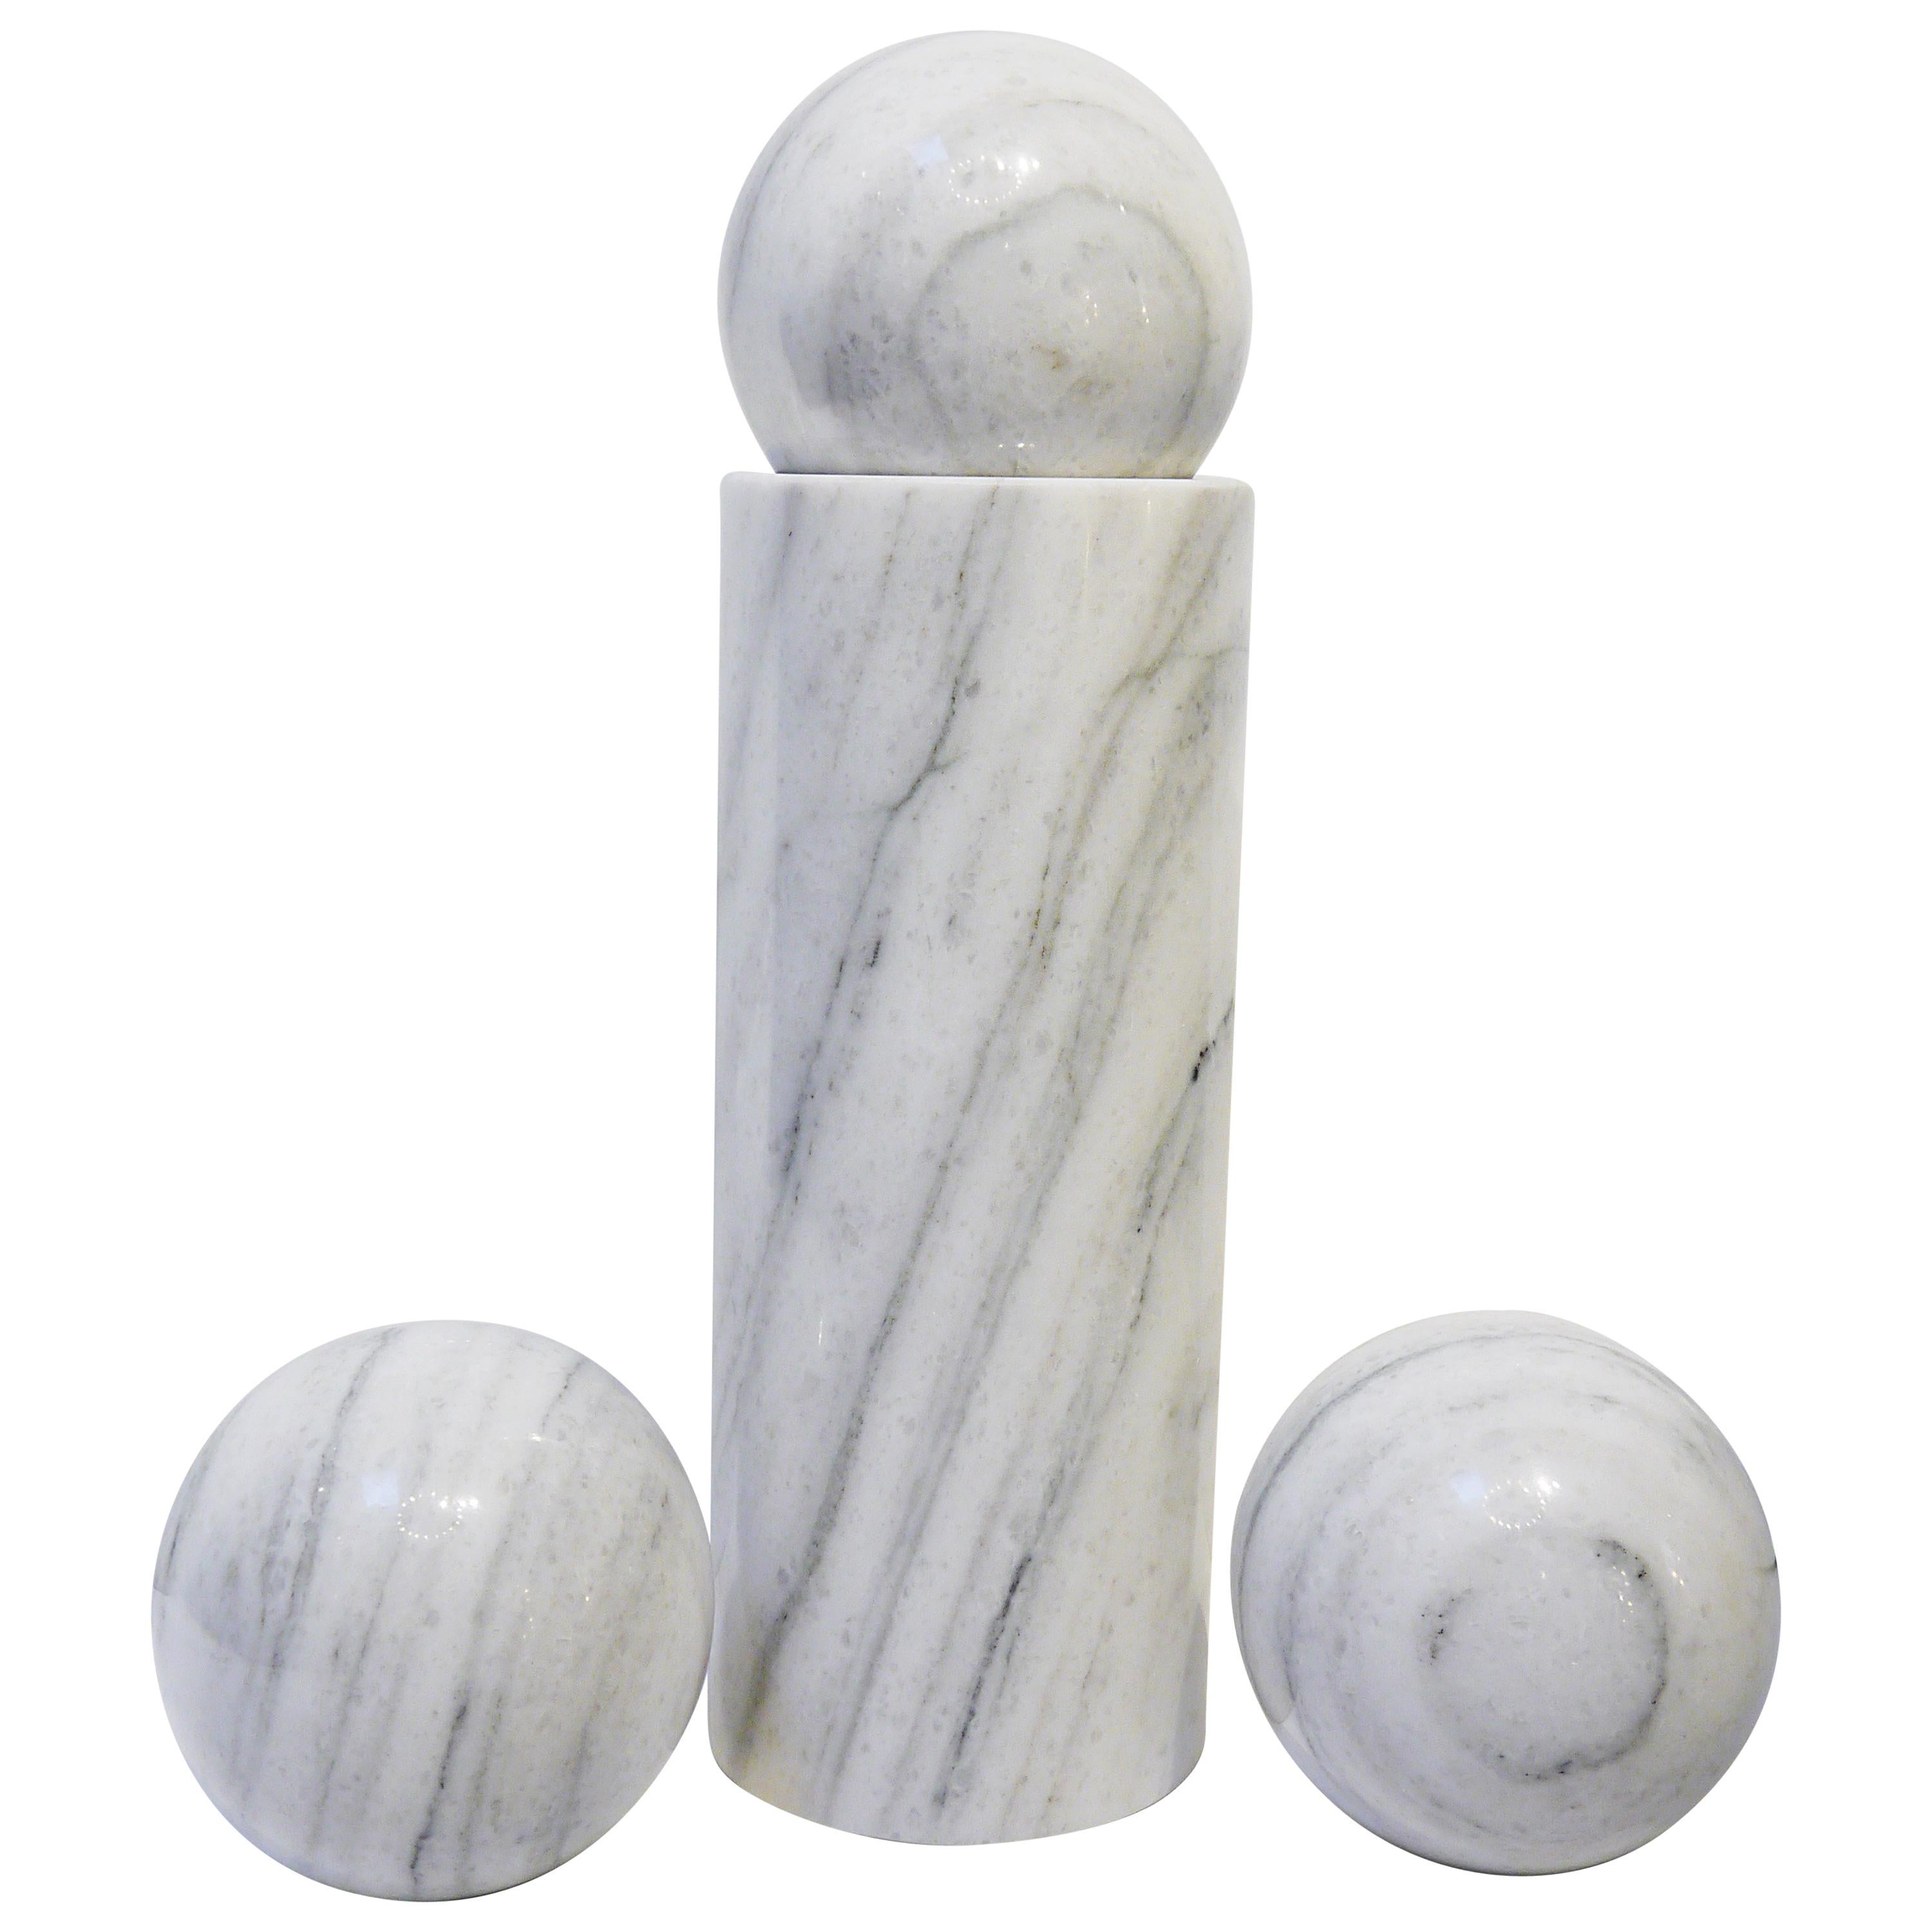 Priape by Man Ray for Alexandre Lolas Gallery, Marble, 102/500, 1972